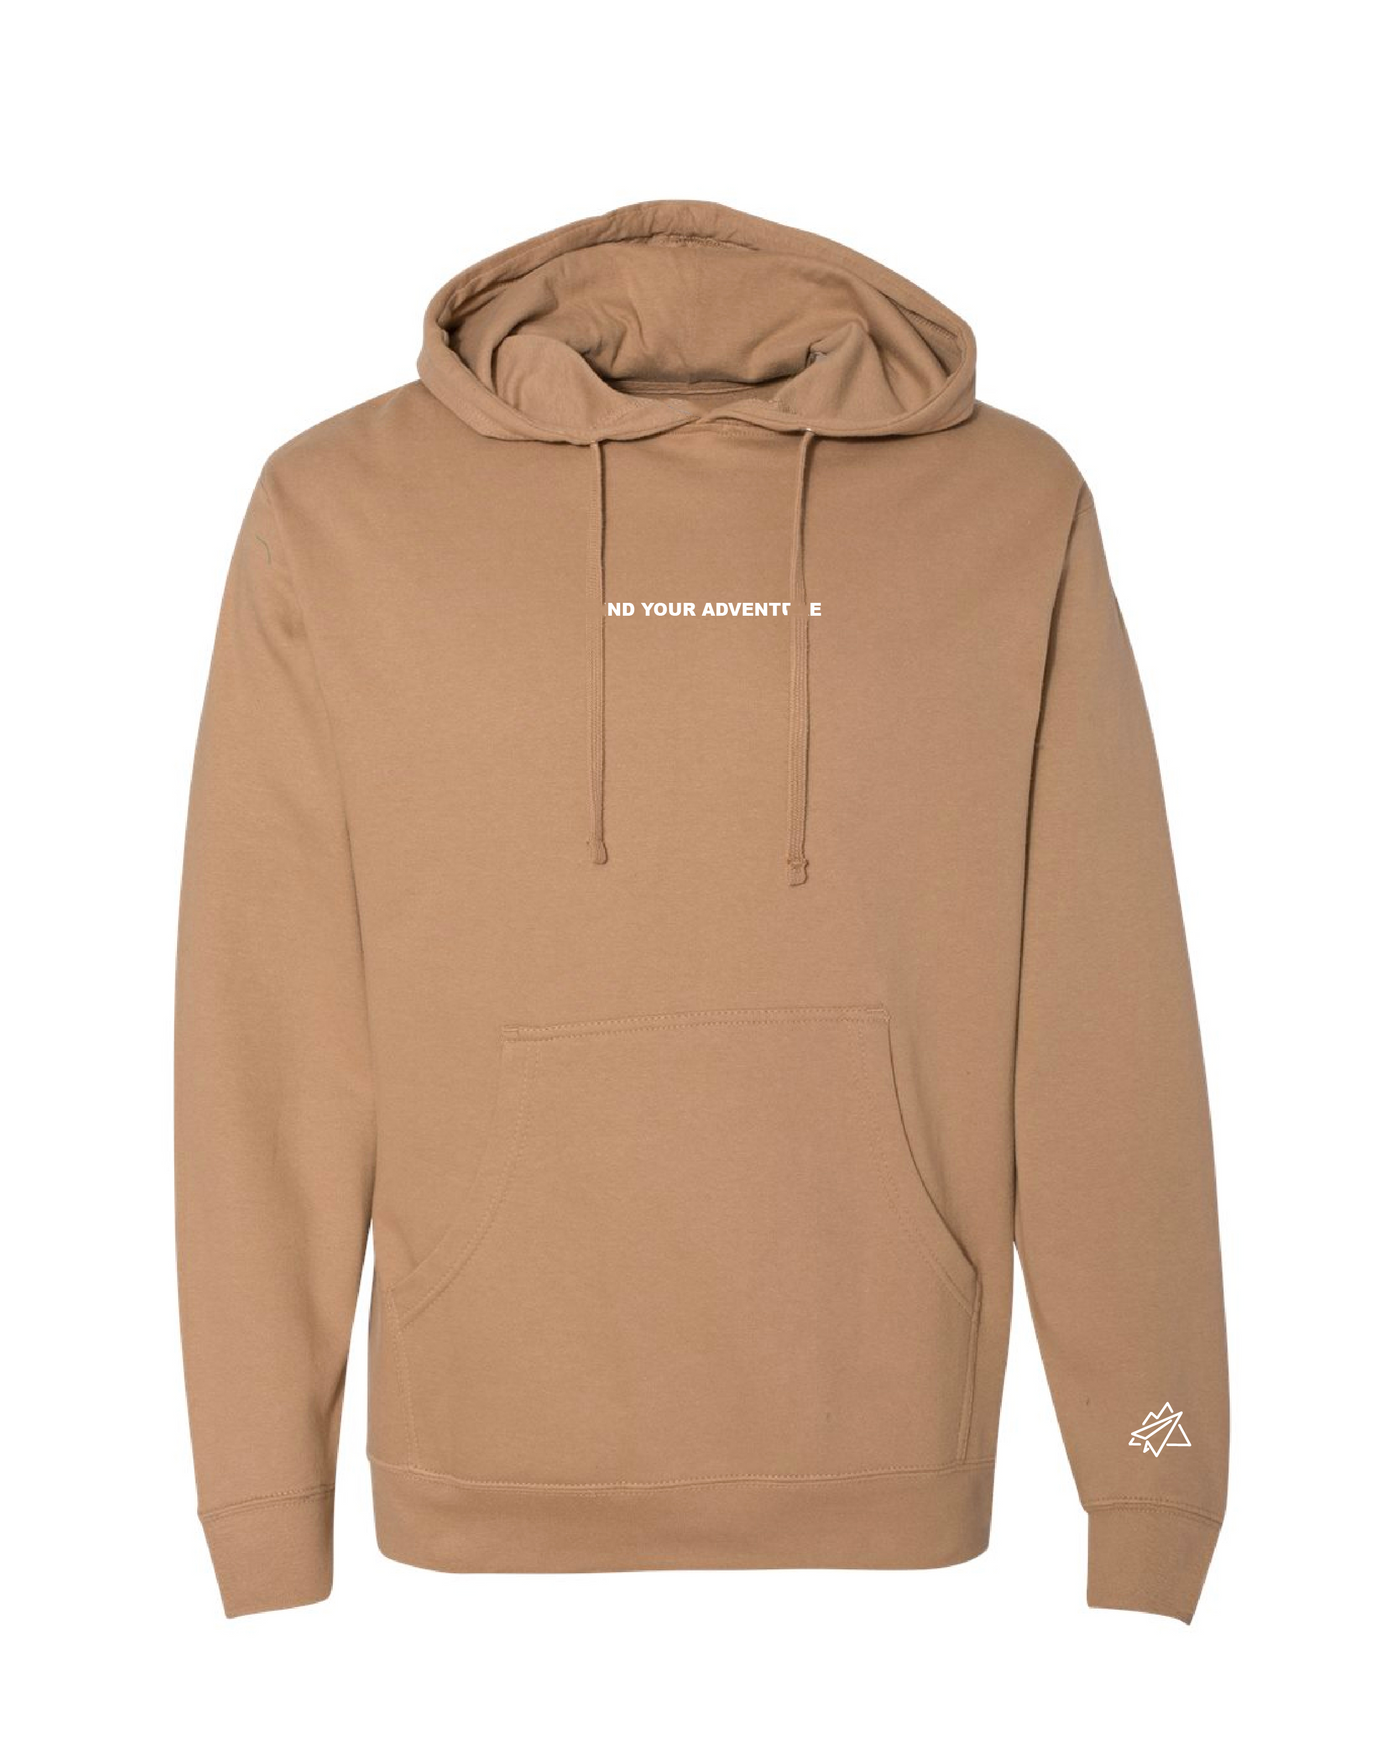 Find Your Adventure Hoodie - Sand